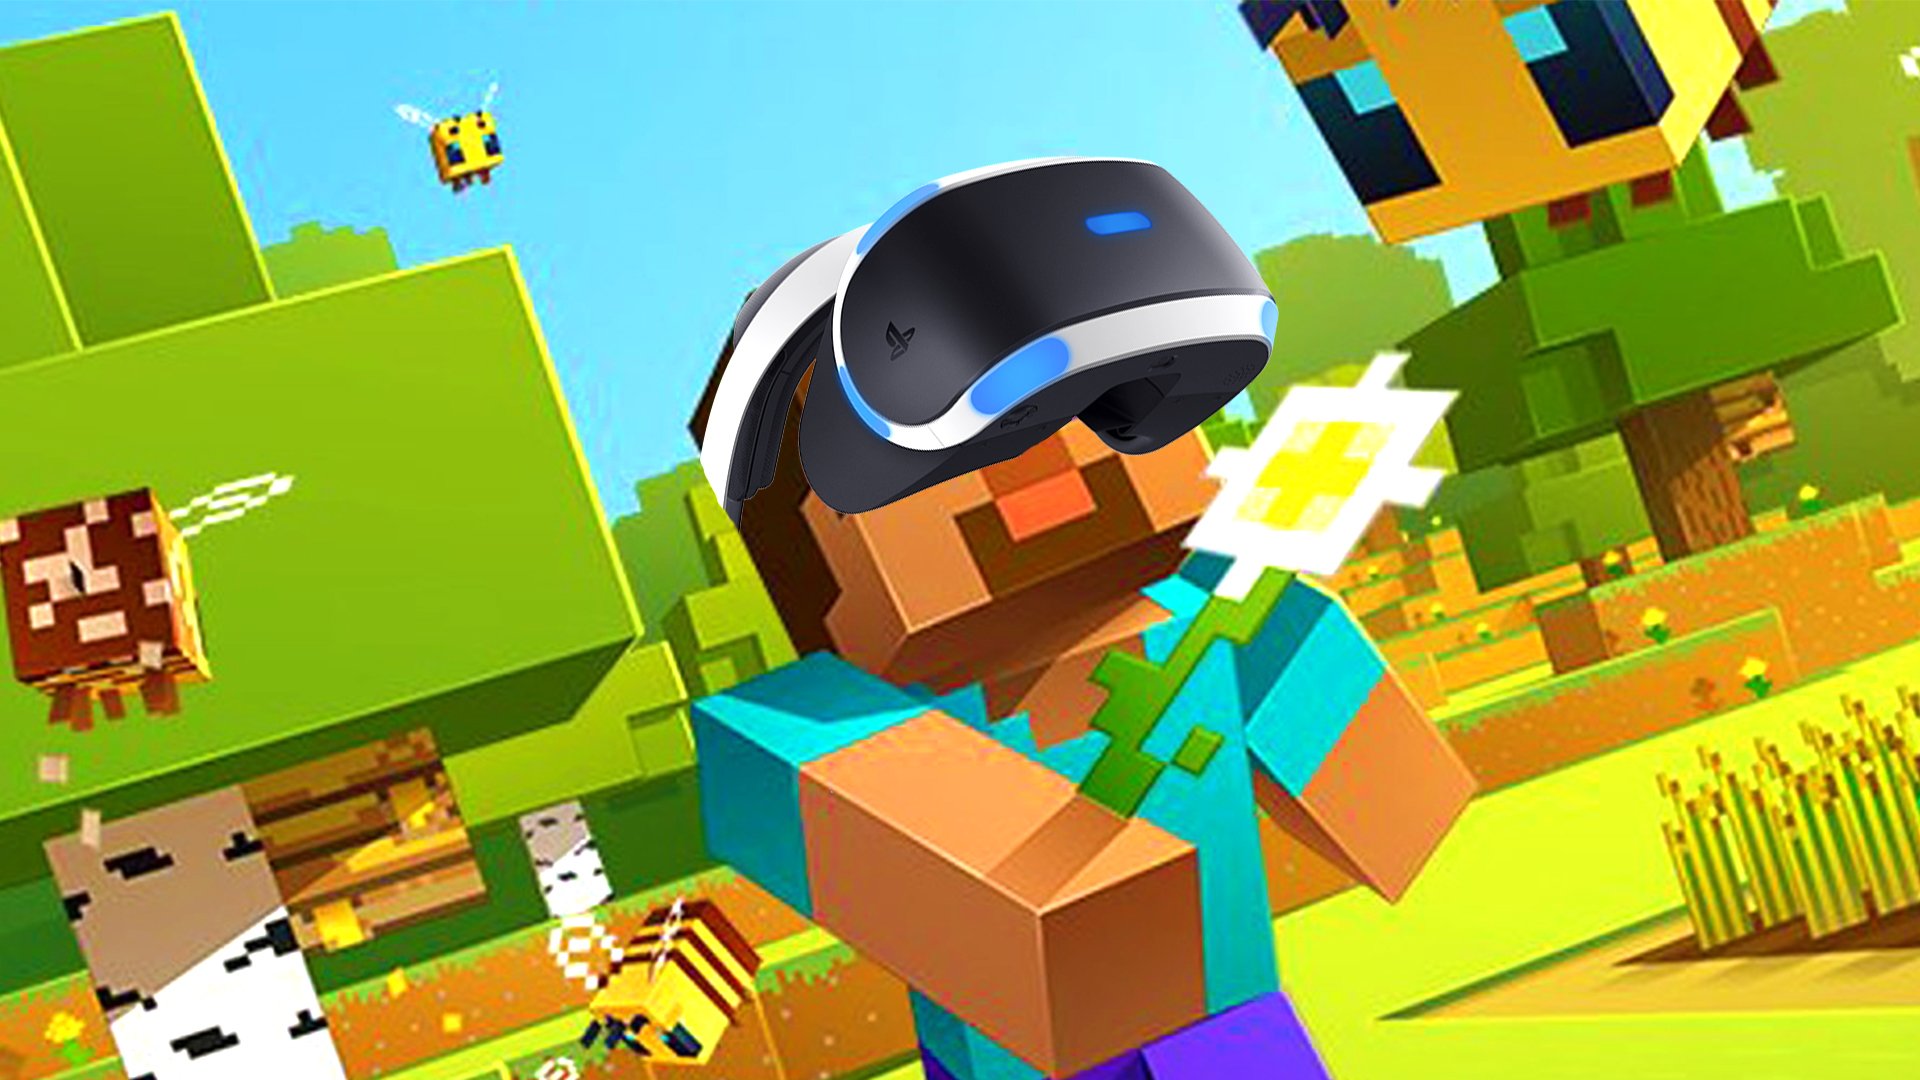 MINECRAFT IS NOW AVAILABLE ON Virtual Reality